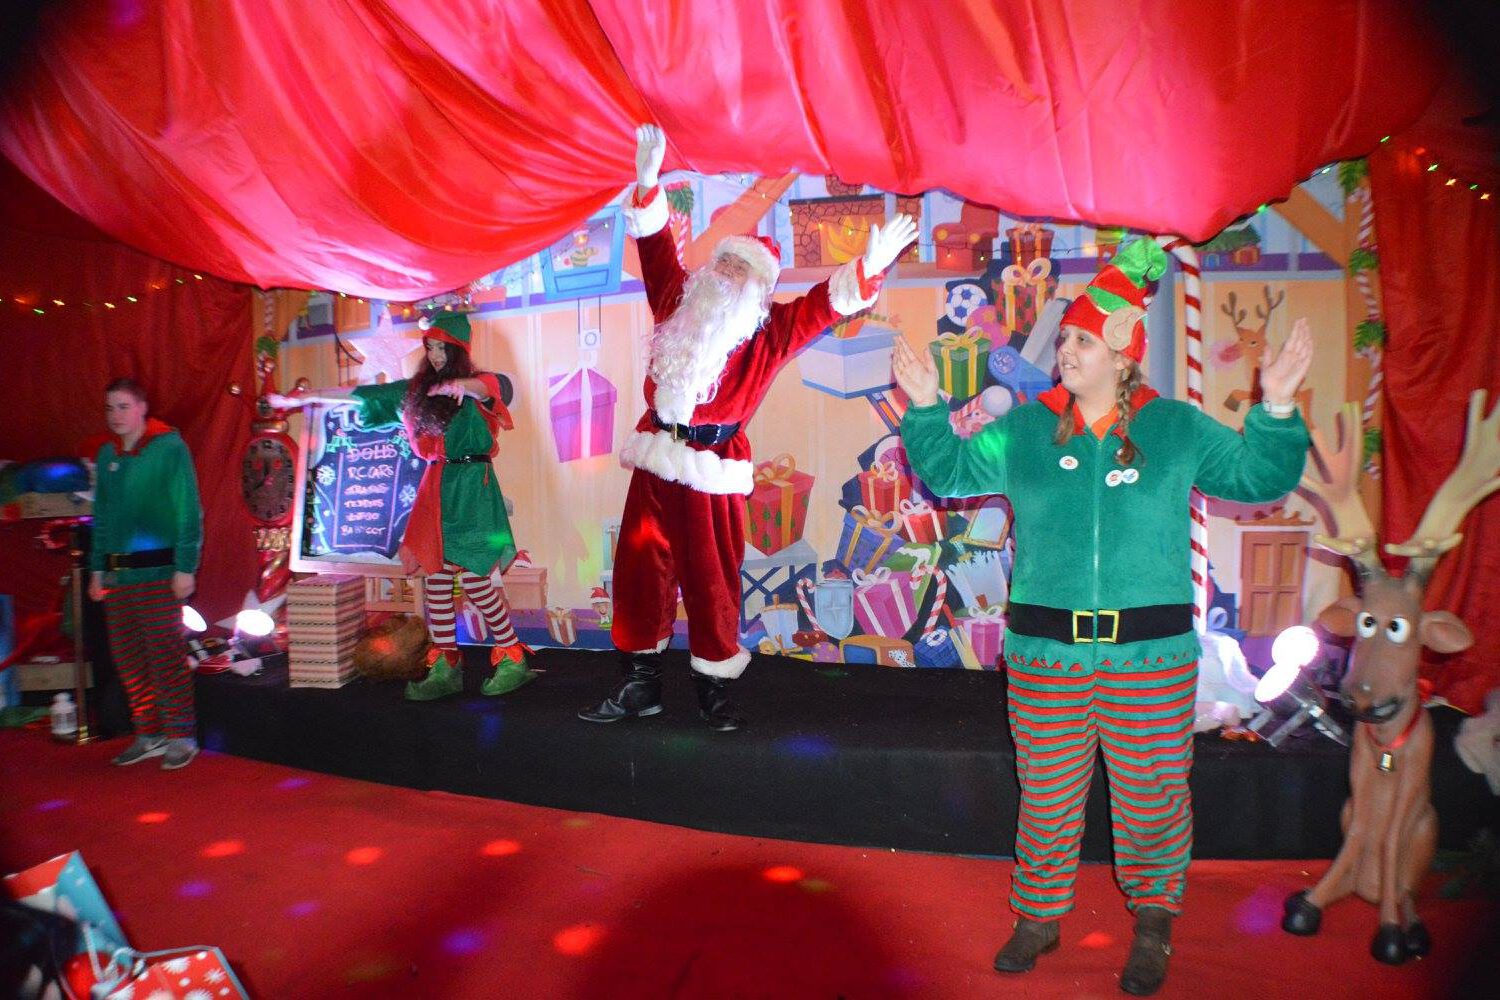 Santa clause and his elves dancing in his grotto